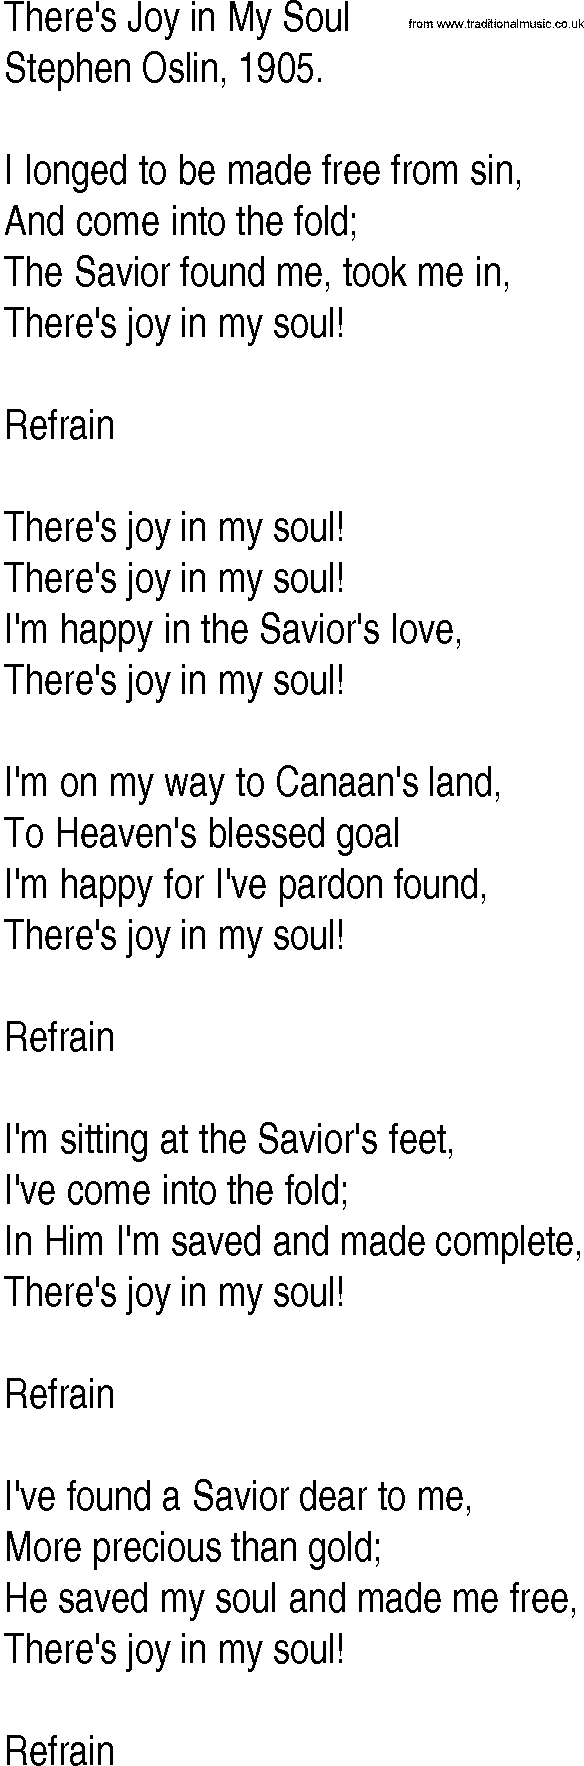 Hymn and Gospel Song: There's Joy in My Soul by Stephen Oslin lyrics